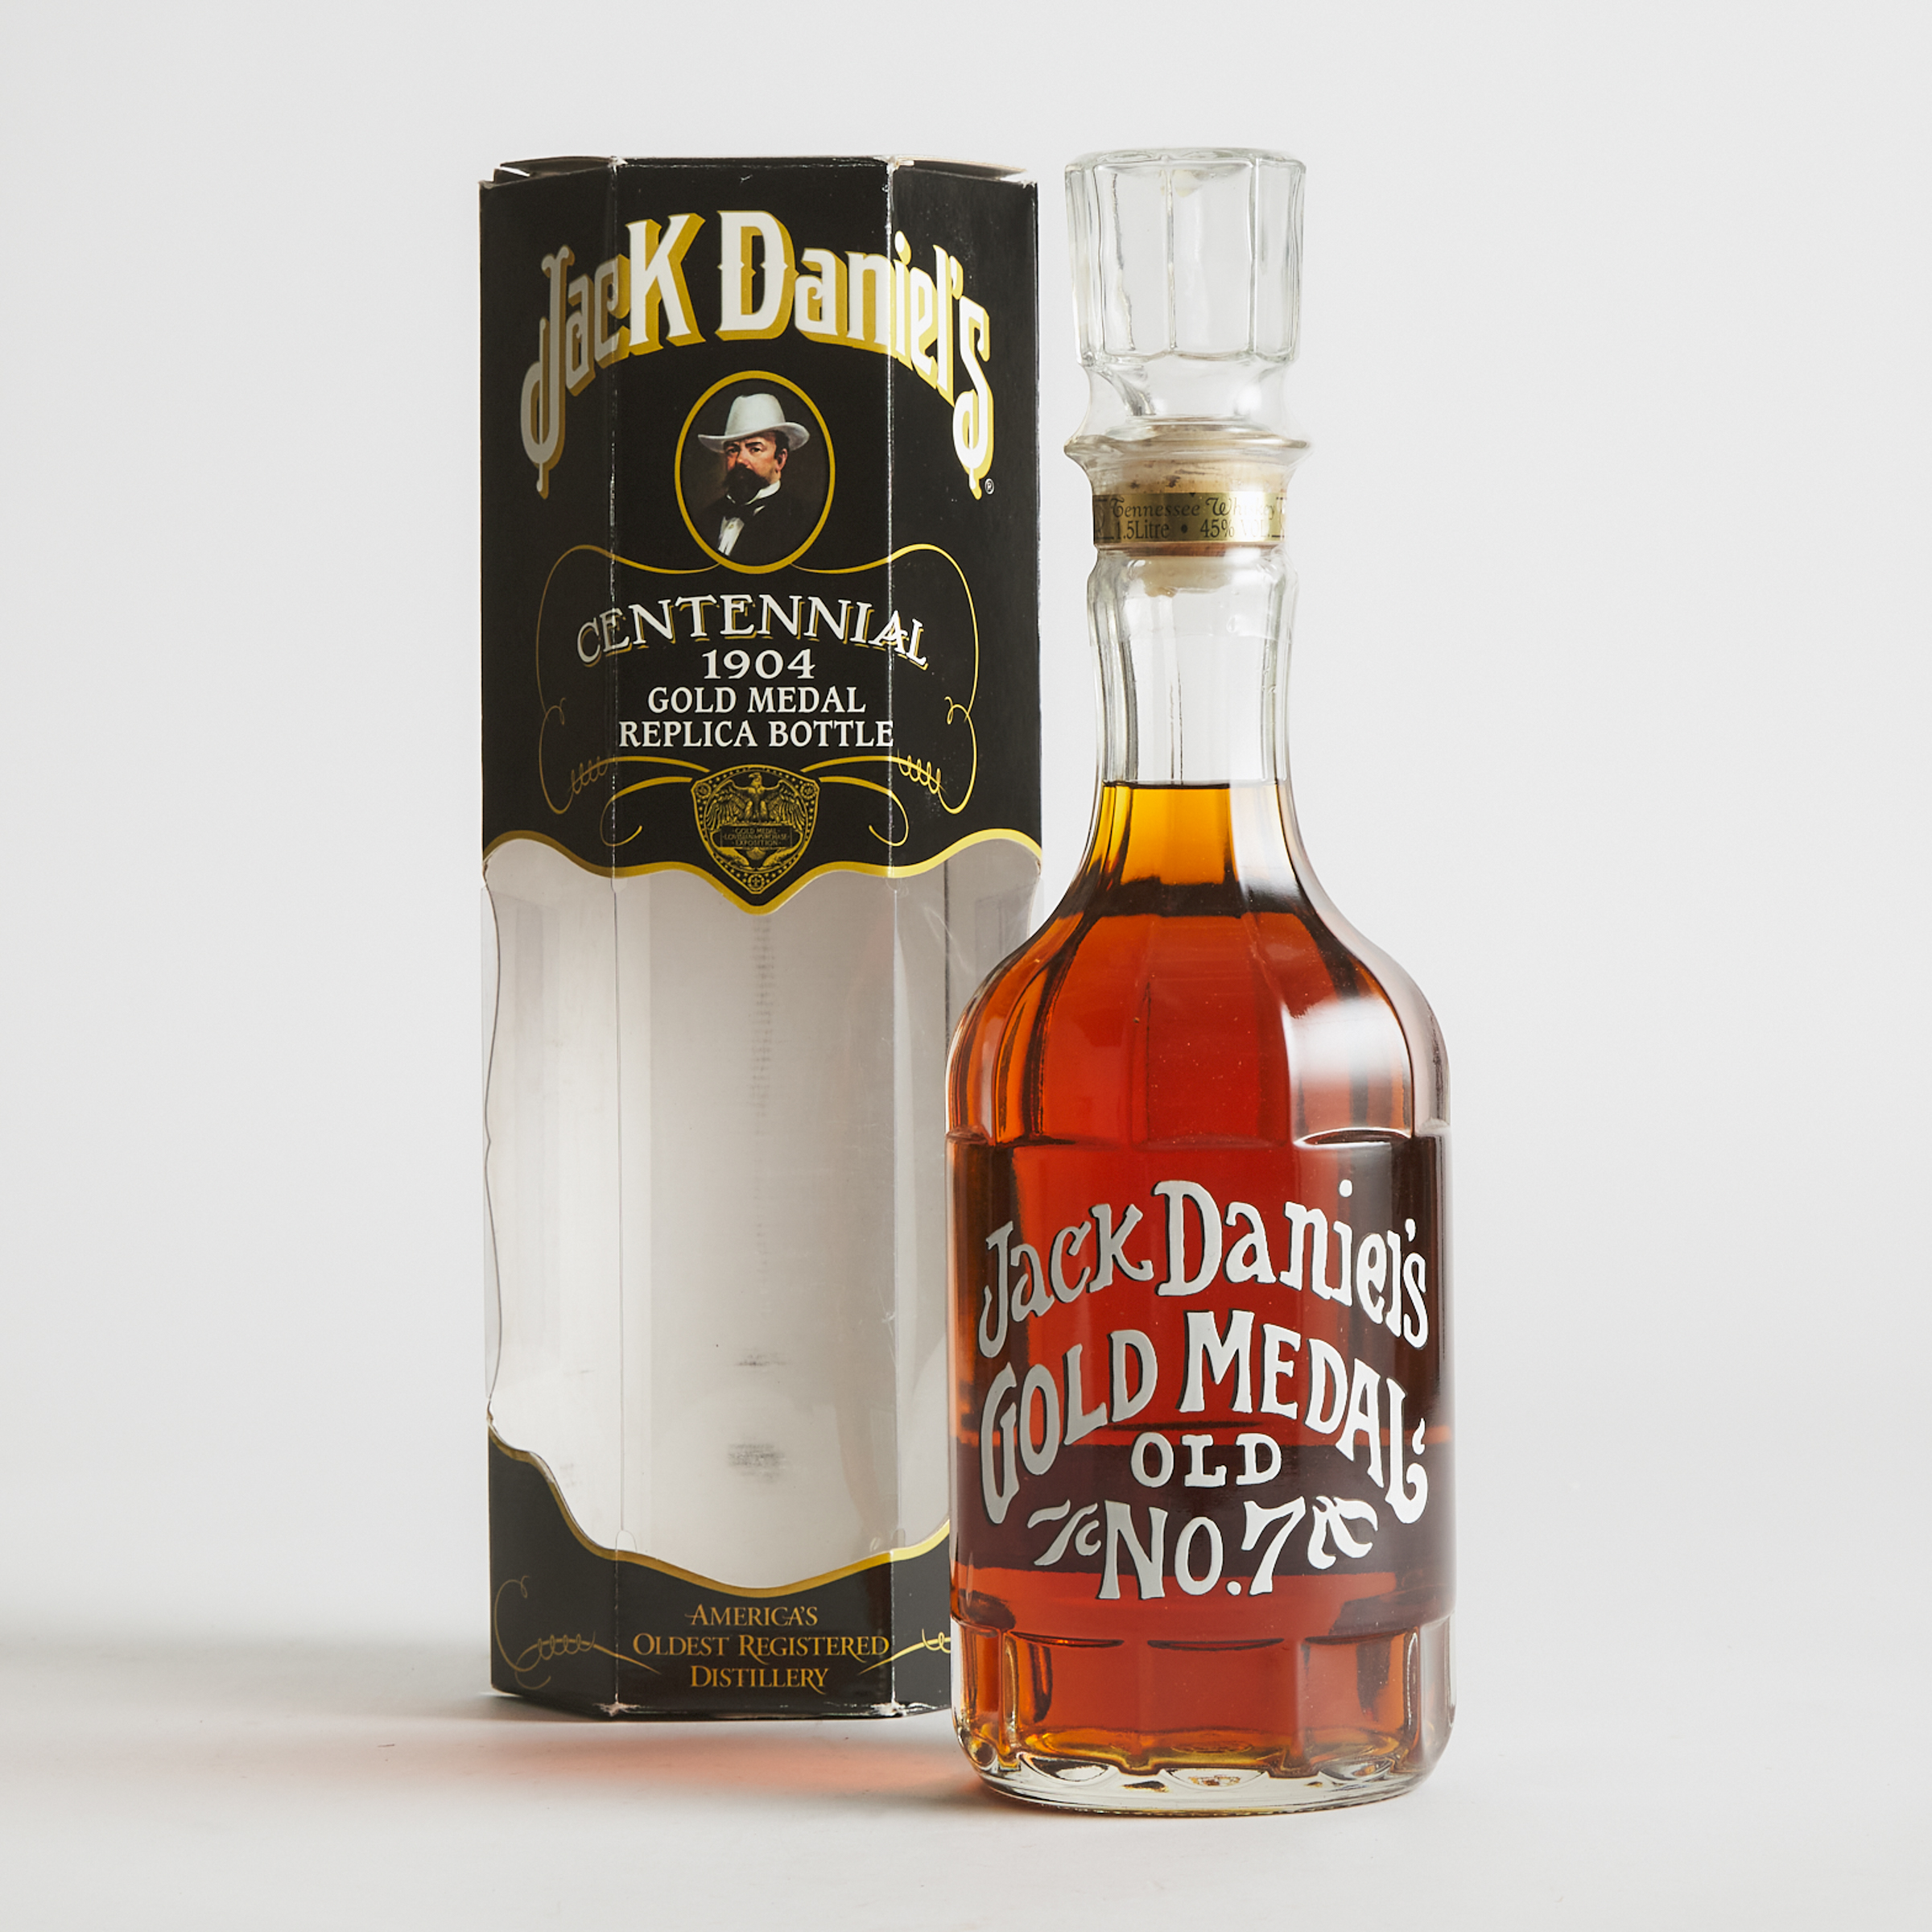 JACK DANIEL'S TENNESSEE WHISKEY NAS (ONE 1500 ML)